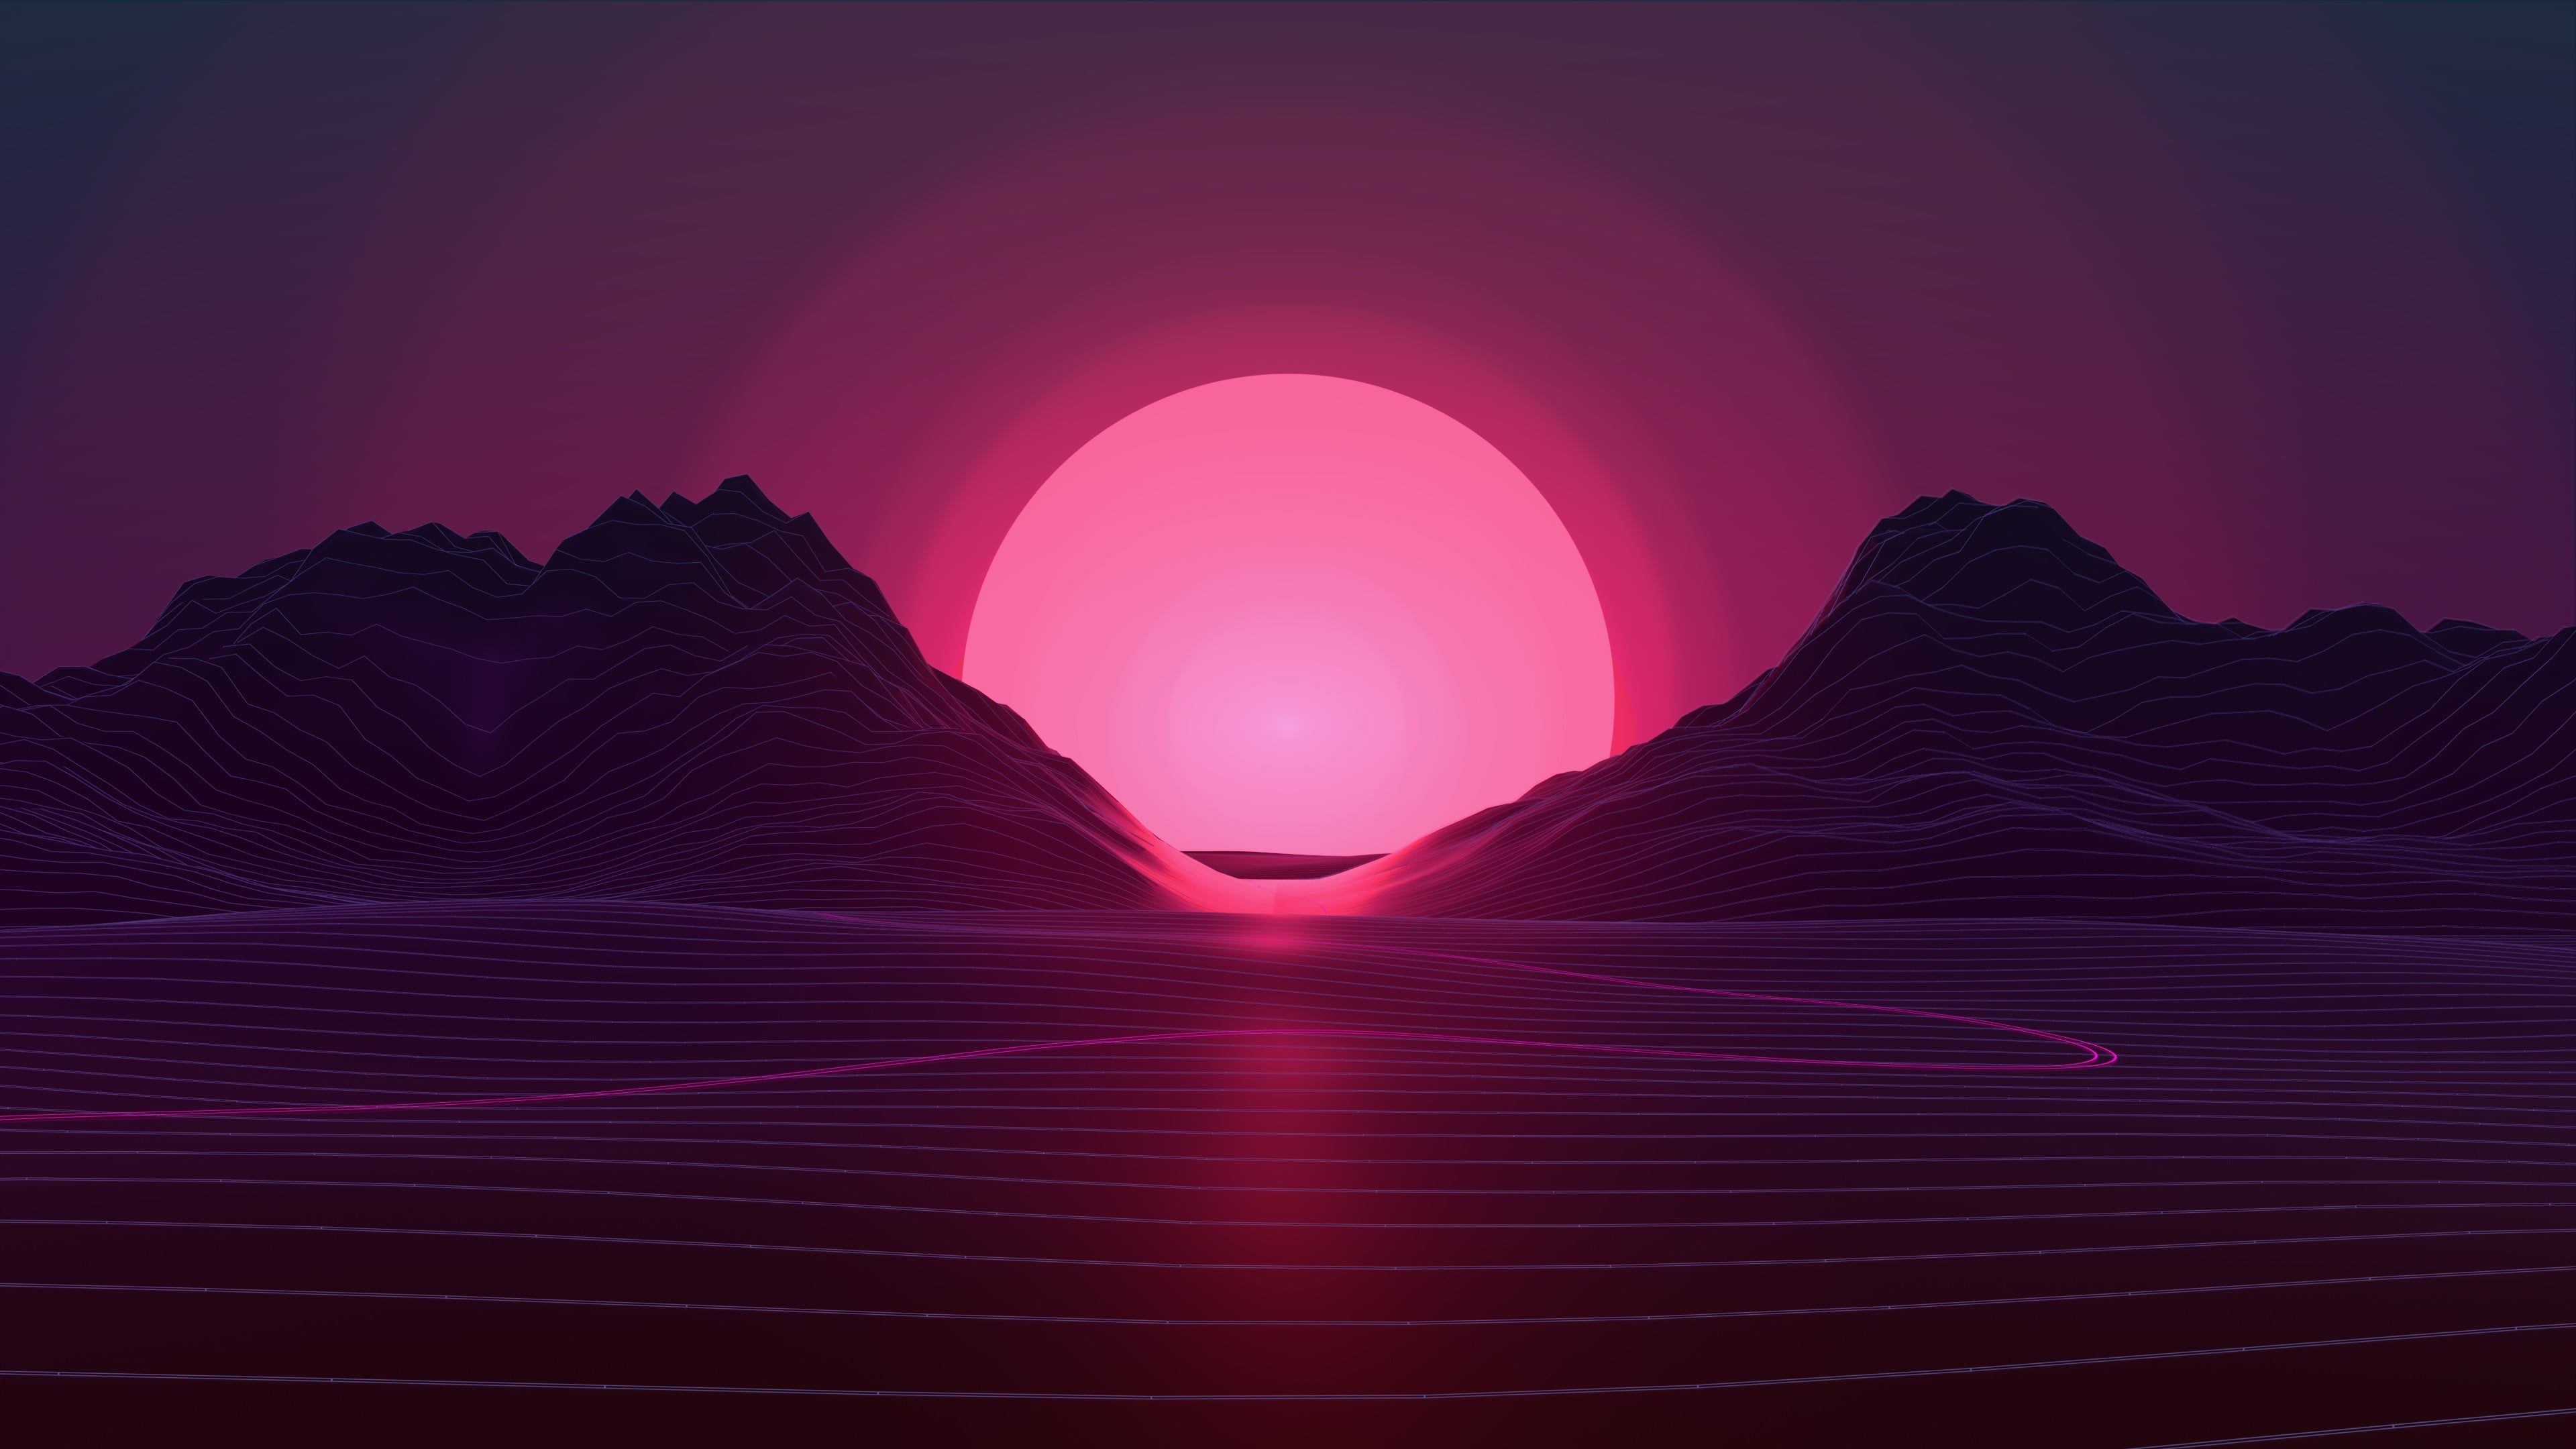 mountain and sun wallpaper, mountain with background of sunrise digital wallpaper #neon #sunset Retro style. Vaporwave wallpaper, Sunset wallpaper, Neon wallpaper